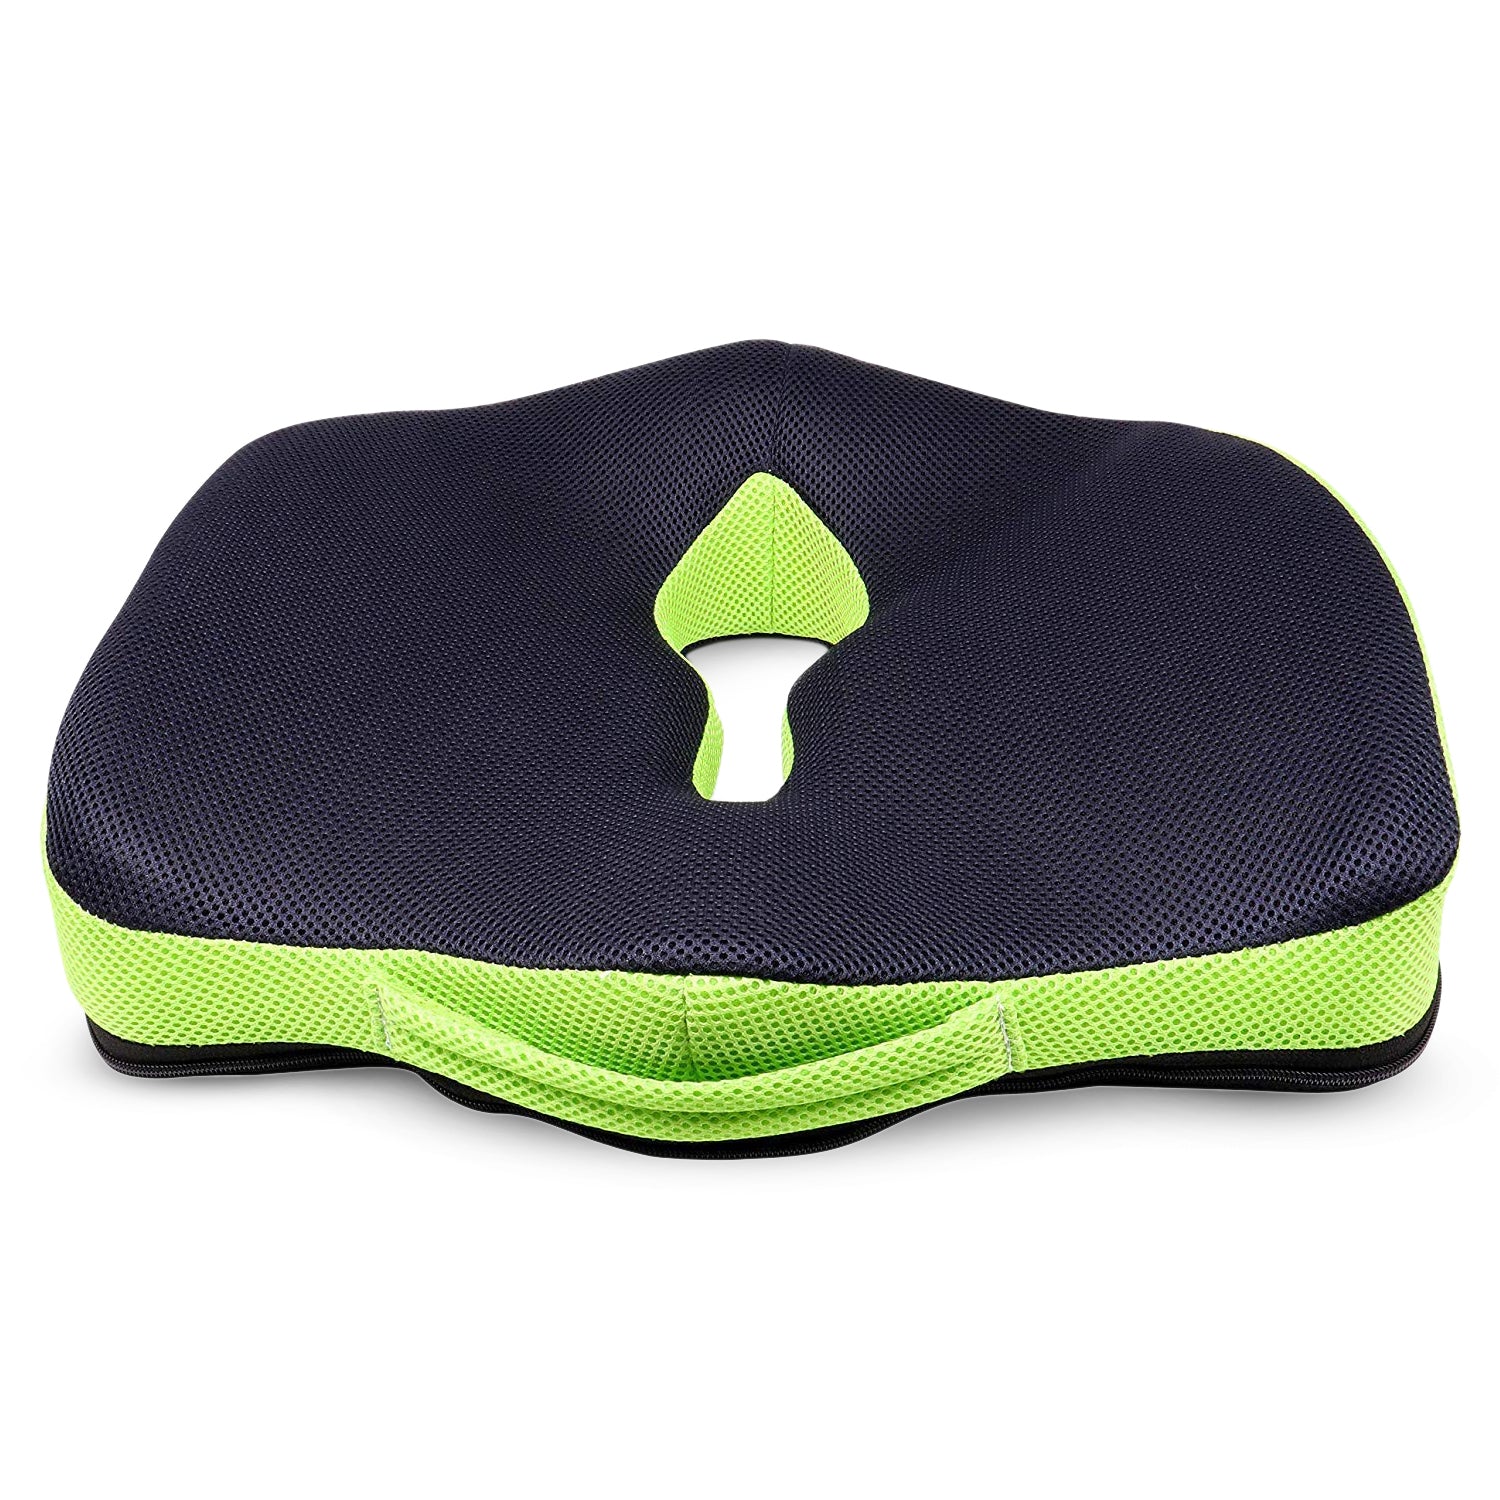 Coccyx Pillow & Coccyx Cushion Seat for Relief from Sciatica & Hip Pain –  Sleepsia India Pvt Ltd